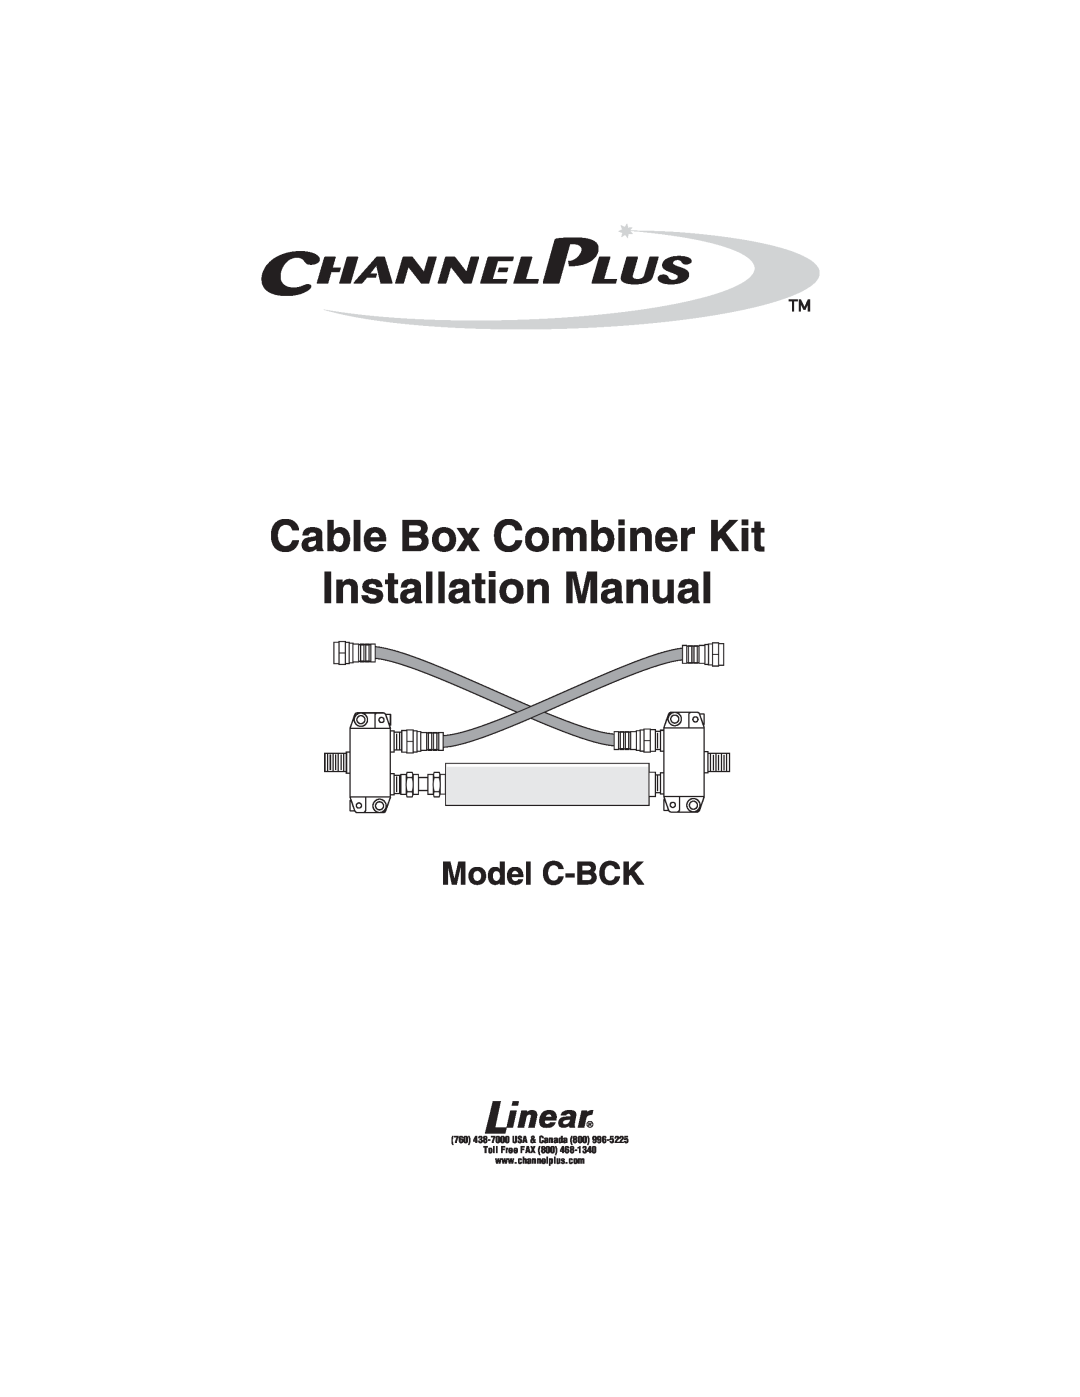 Channel Plus C-BCK manual 760 438-7000 USA & Canada 800 996-5225 Toll Free FAX 800 